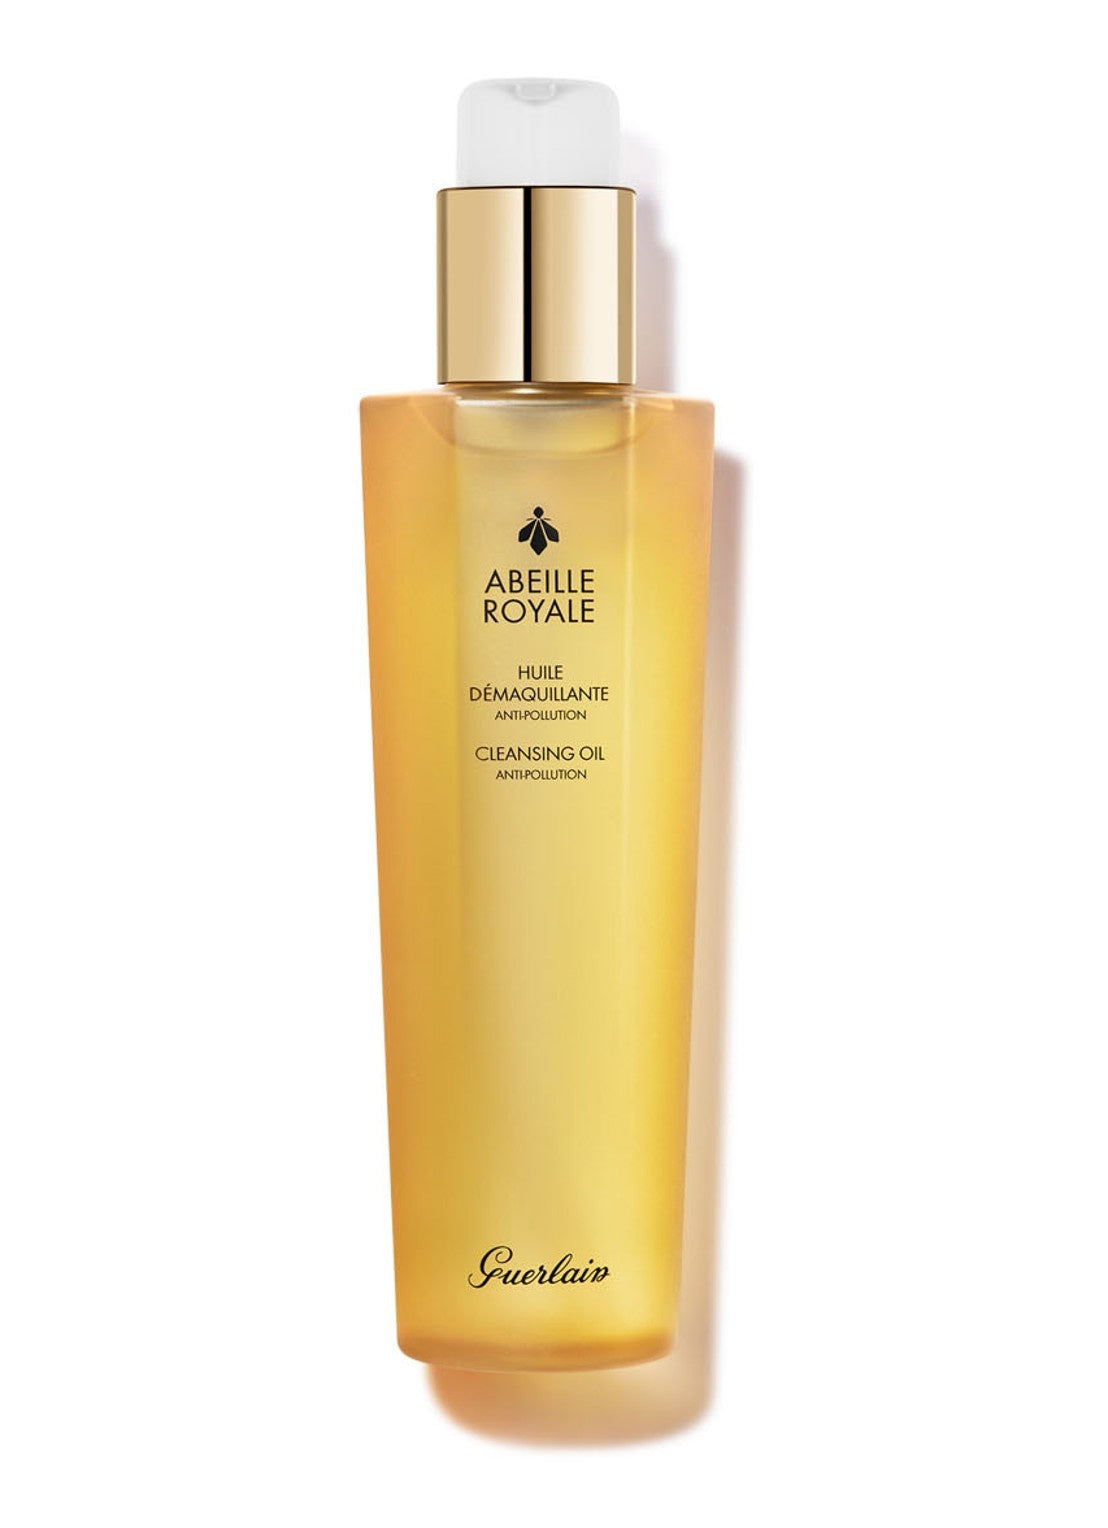 Abeille Royale Cleansing oil Anti-Pollution